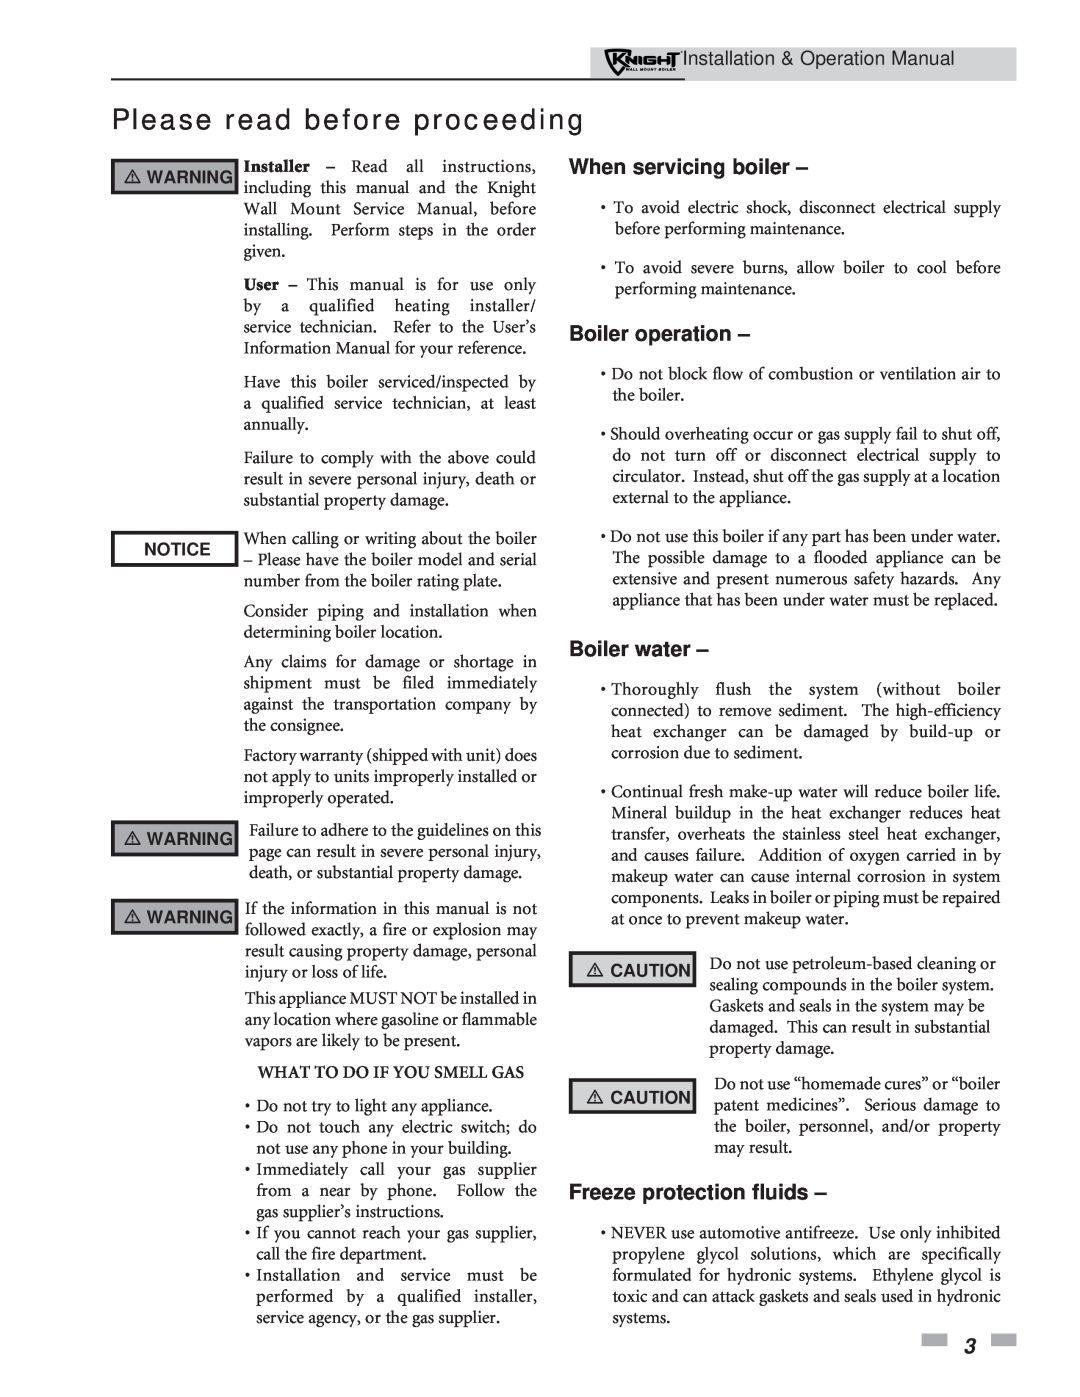 Lochinvar 51-211 operation manual Please read before proceeding, When servicing boiler, Boiler operation, Boiler water 